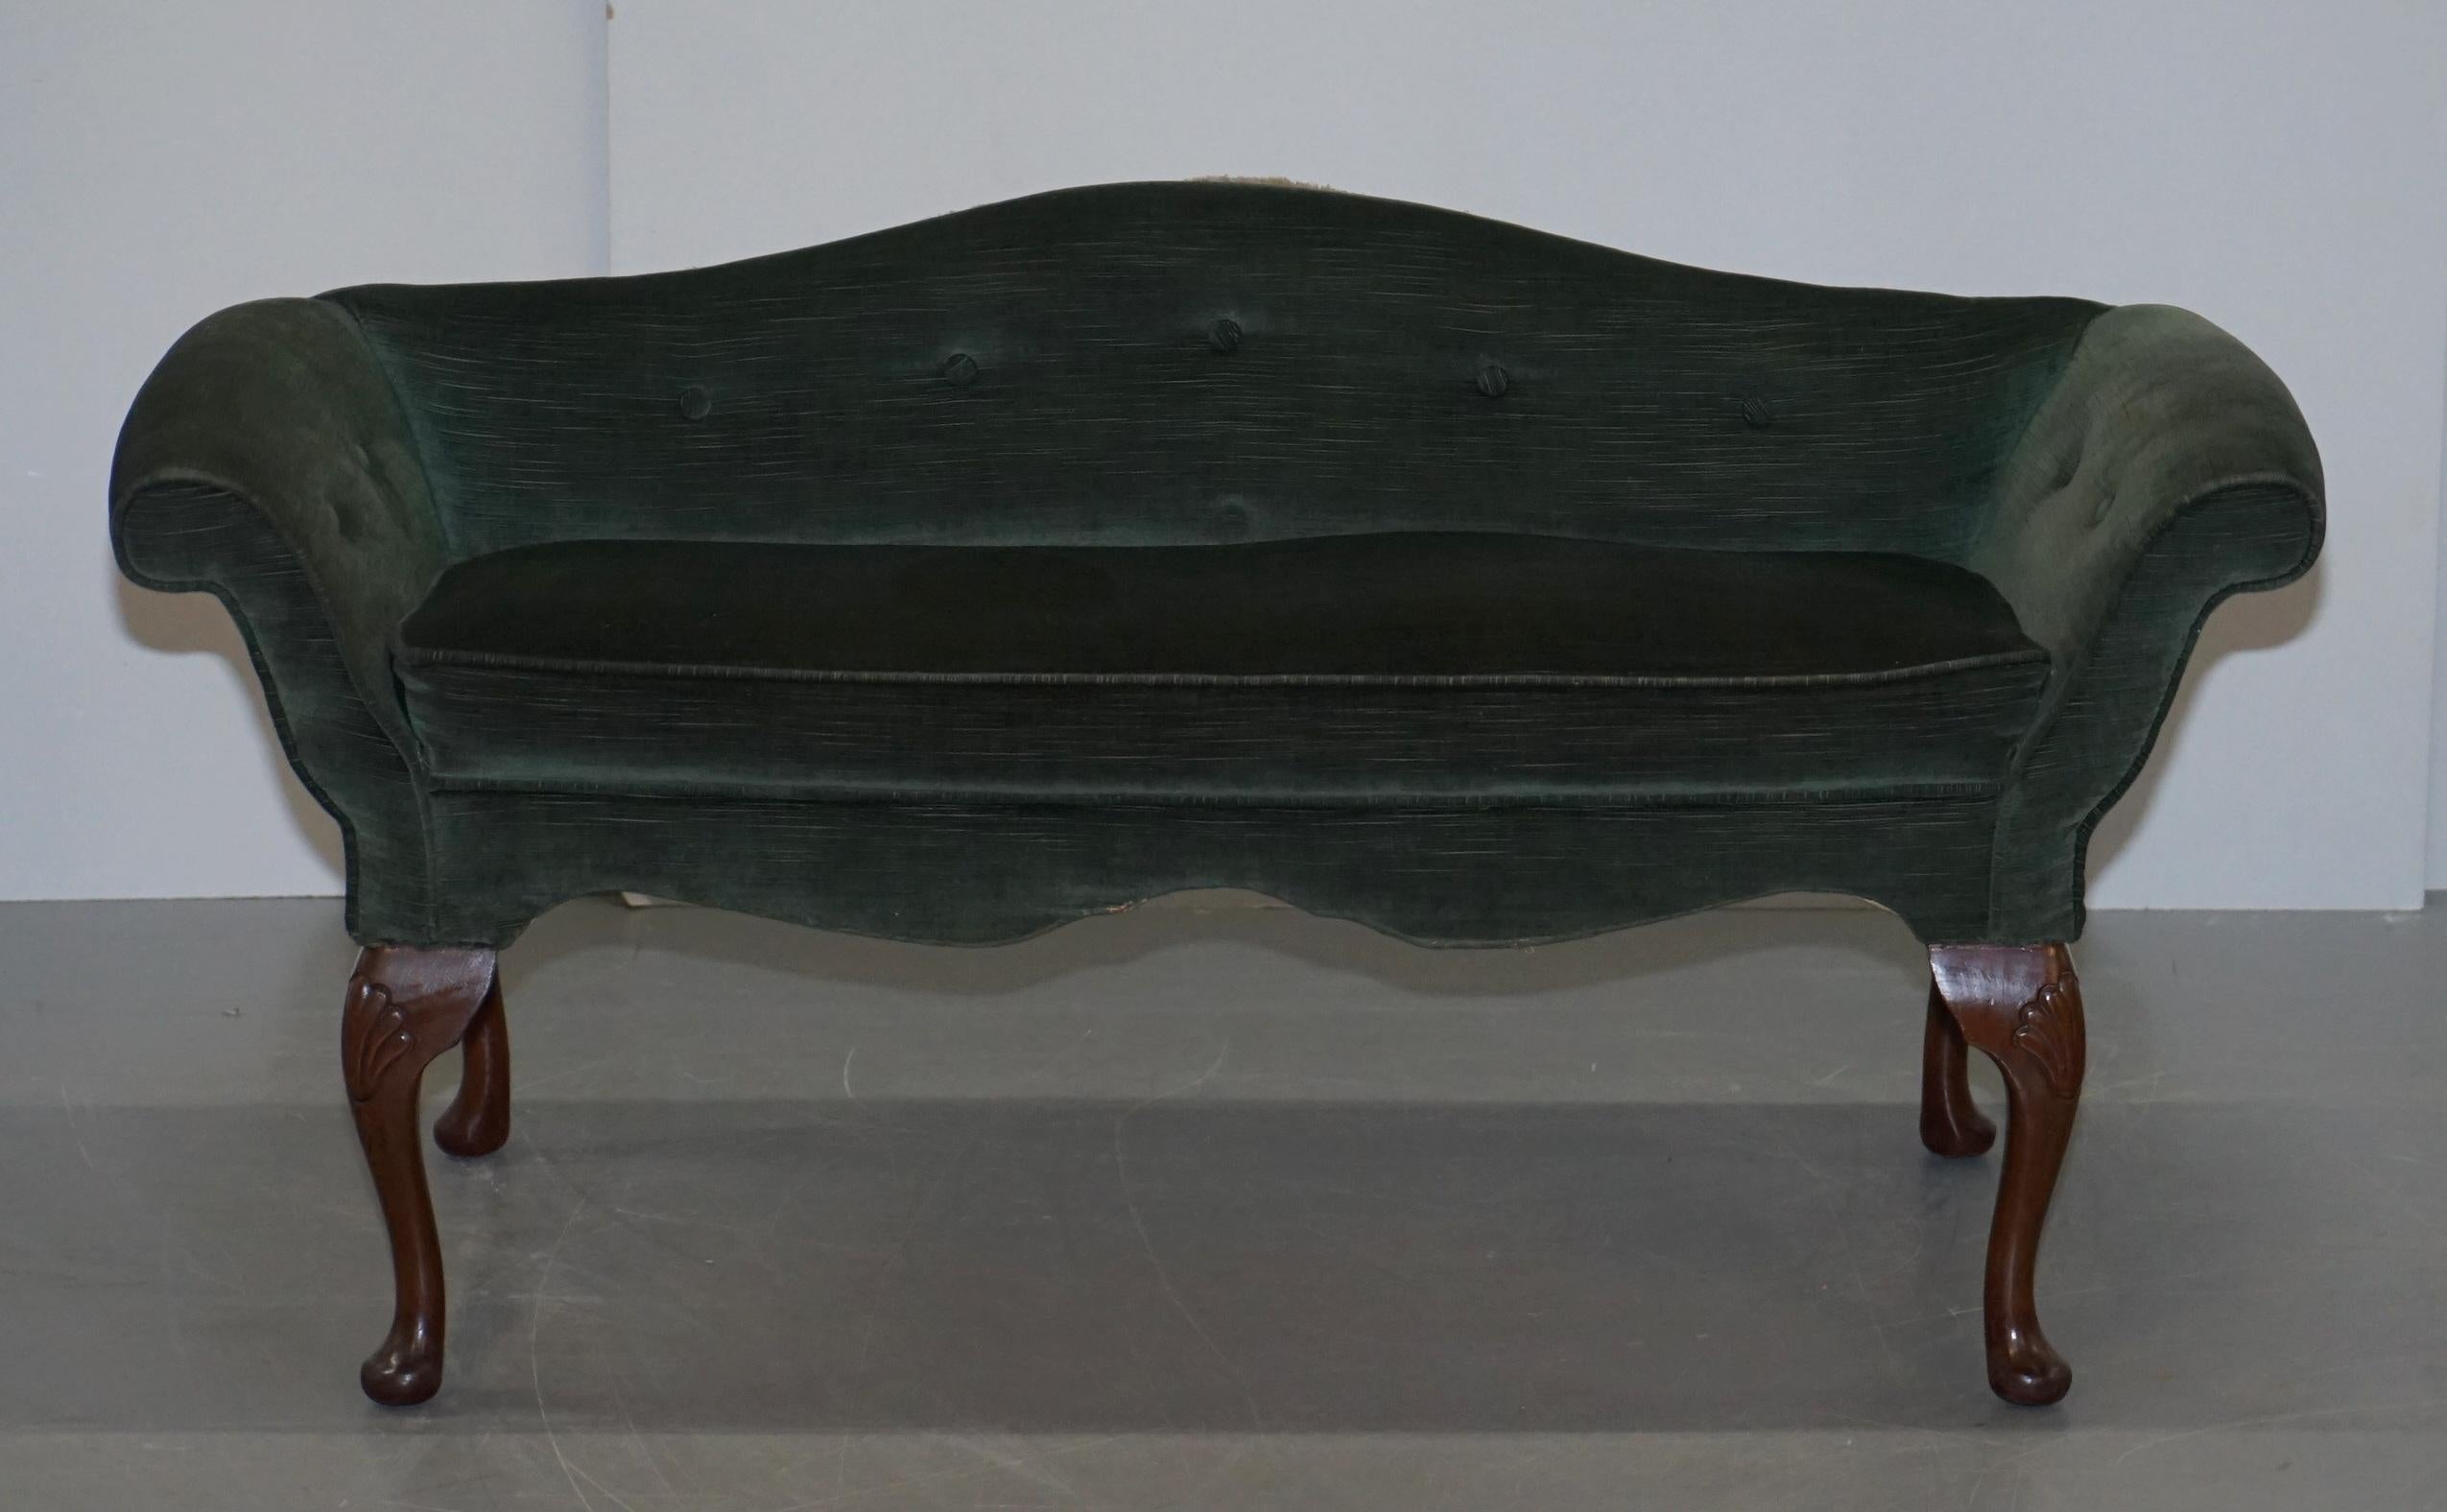 We are delighted to offer this lovely vintage green velour window seat circa 1880 based on an early Thomas Chippendale Georgian sofa

A very good looking and decorative window seat, this is a small piece designed to sit in a bay window, it looks